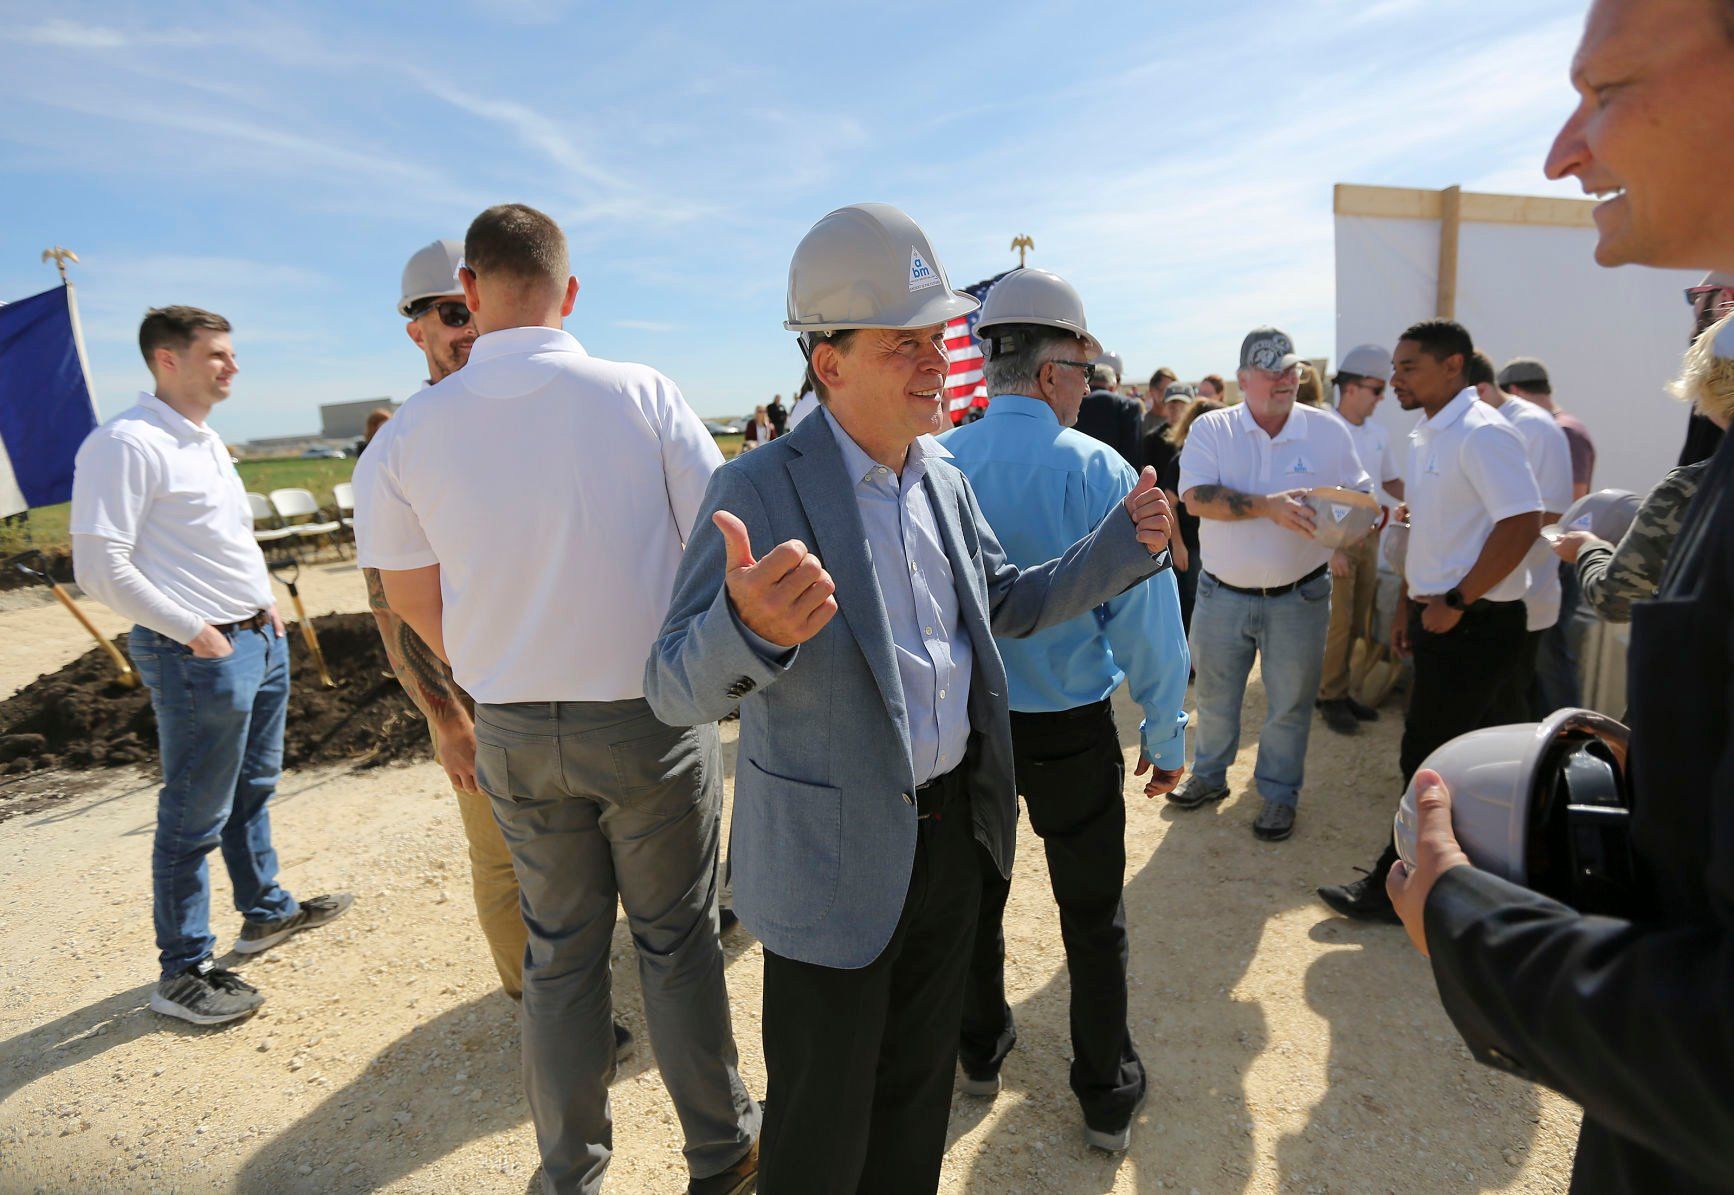 Wolfgang Buehler, co-owner of Ancient Brands Milling, chats with attendees after a groundbreaking event on Tuesday, Oct. 4, 2022. The manufacturer, which makes organic and non-GMO puffed grains, has planned a $26.5 million, 92,000-square-foot project in Dyersville’s 20 West Industrial Park.    PHOTO CREDIT: Dave Kettering